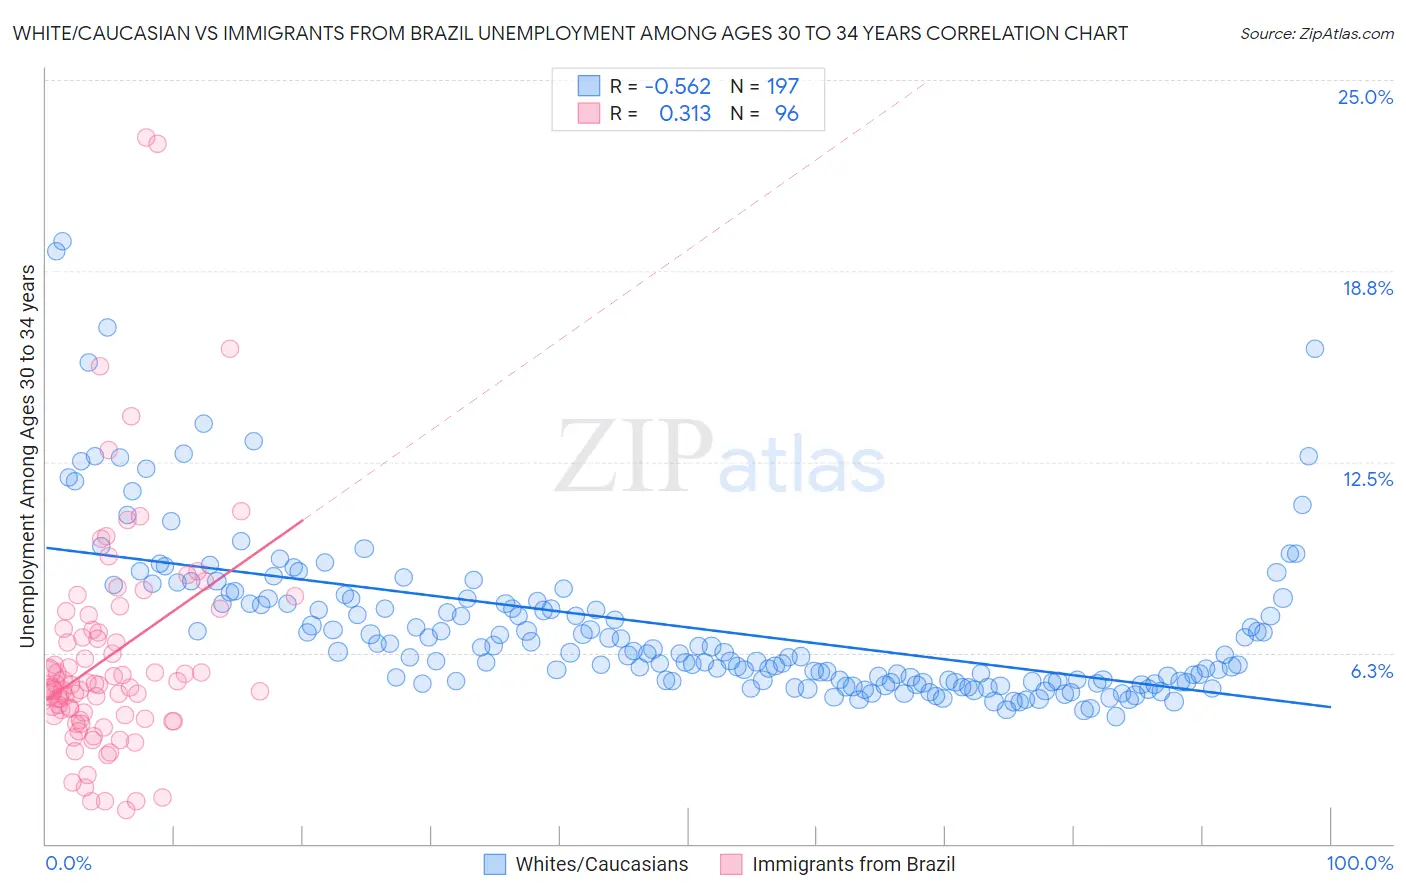 White/Caucasian vs Immigrants from Brazil Unemployment Among Ages 30 to 34 years